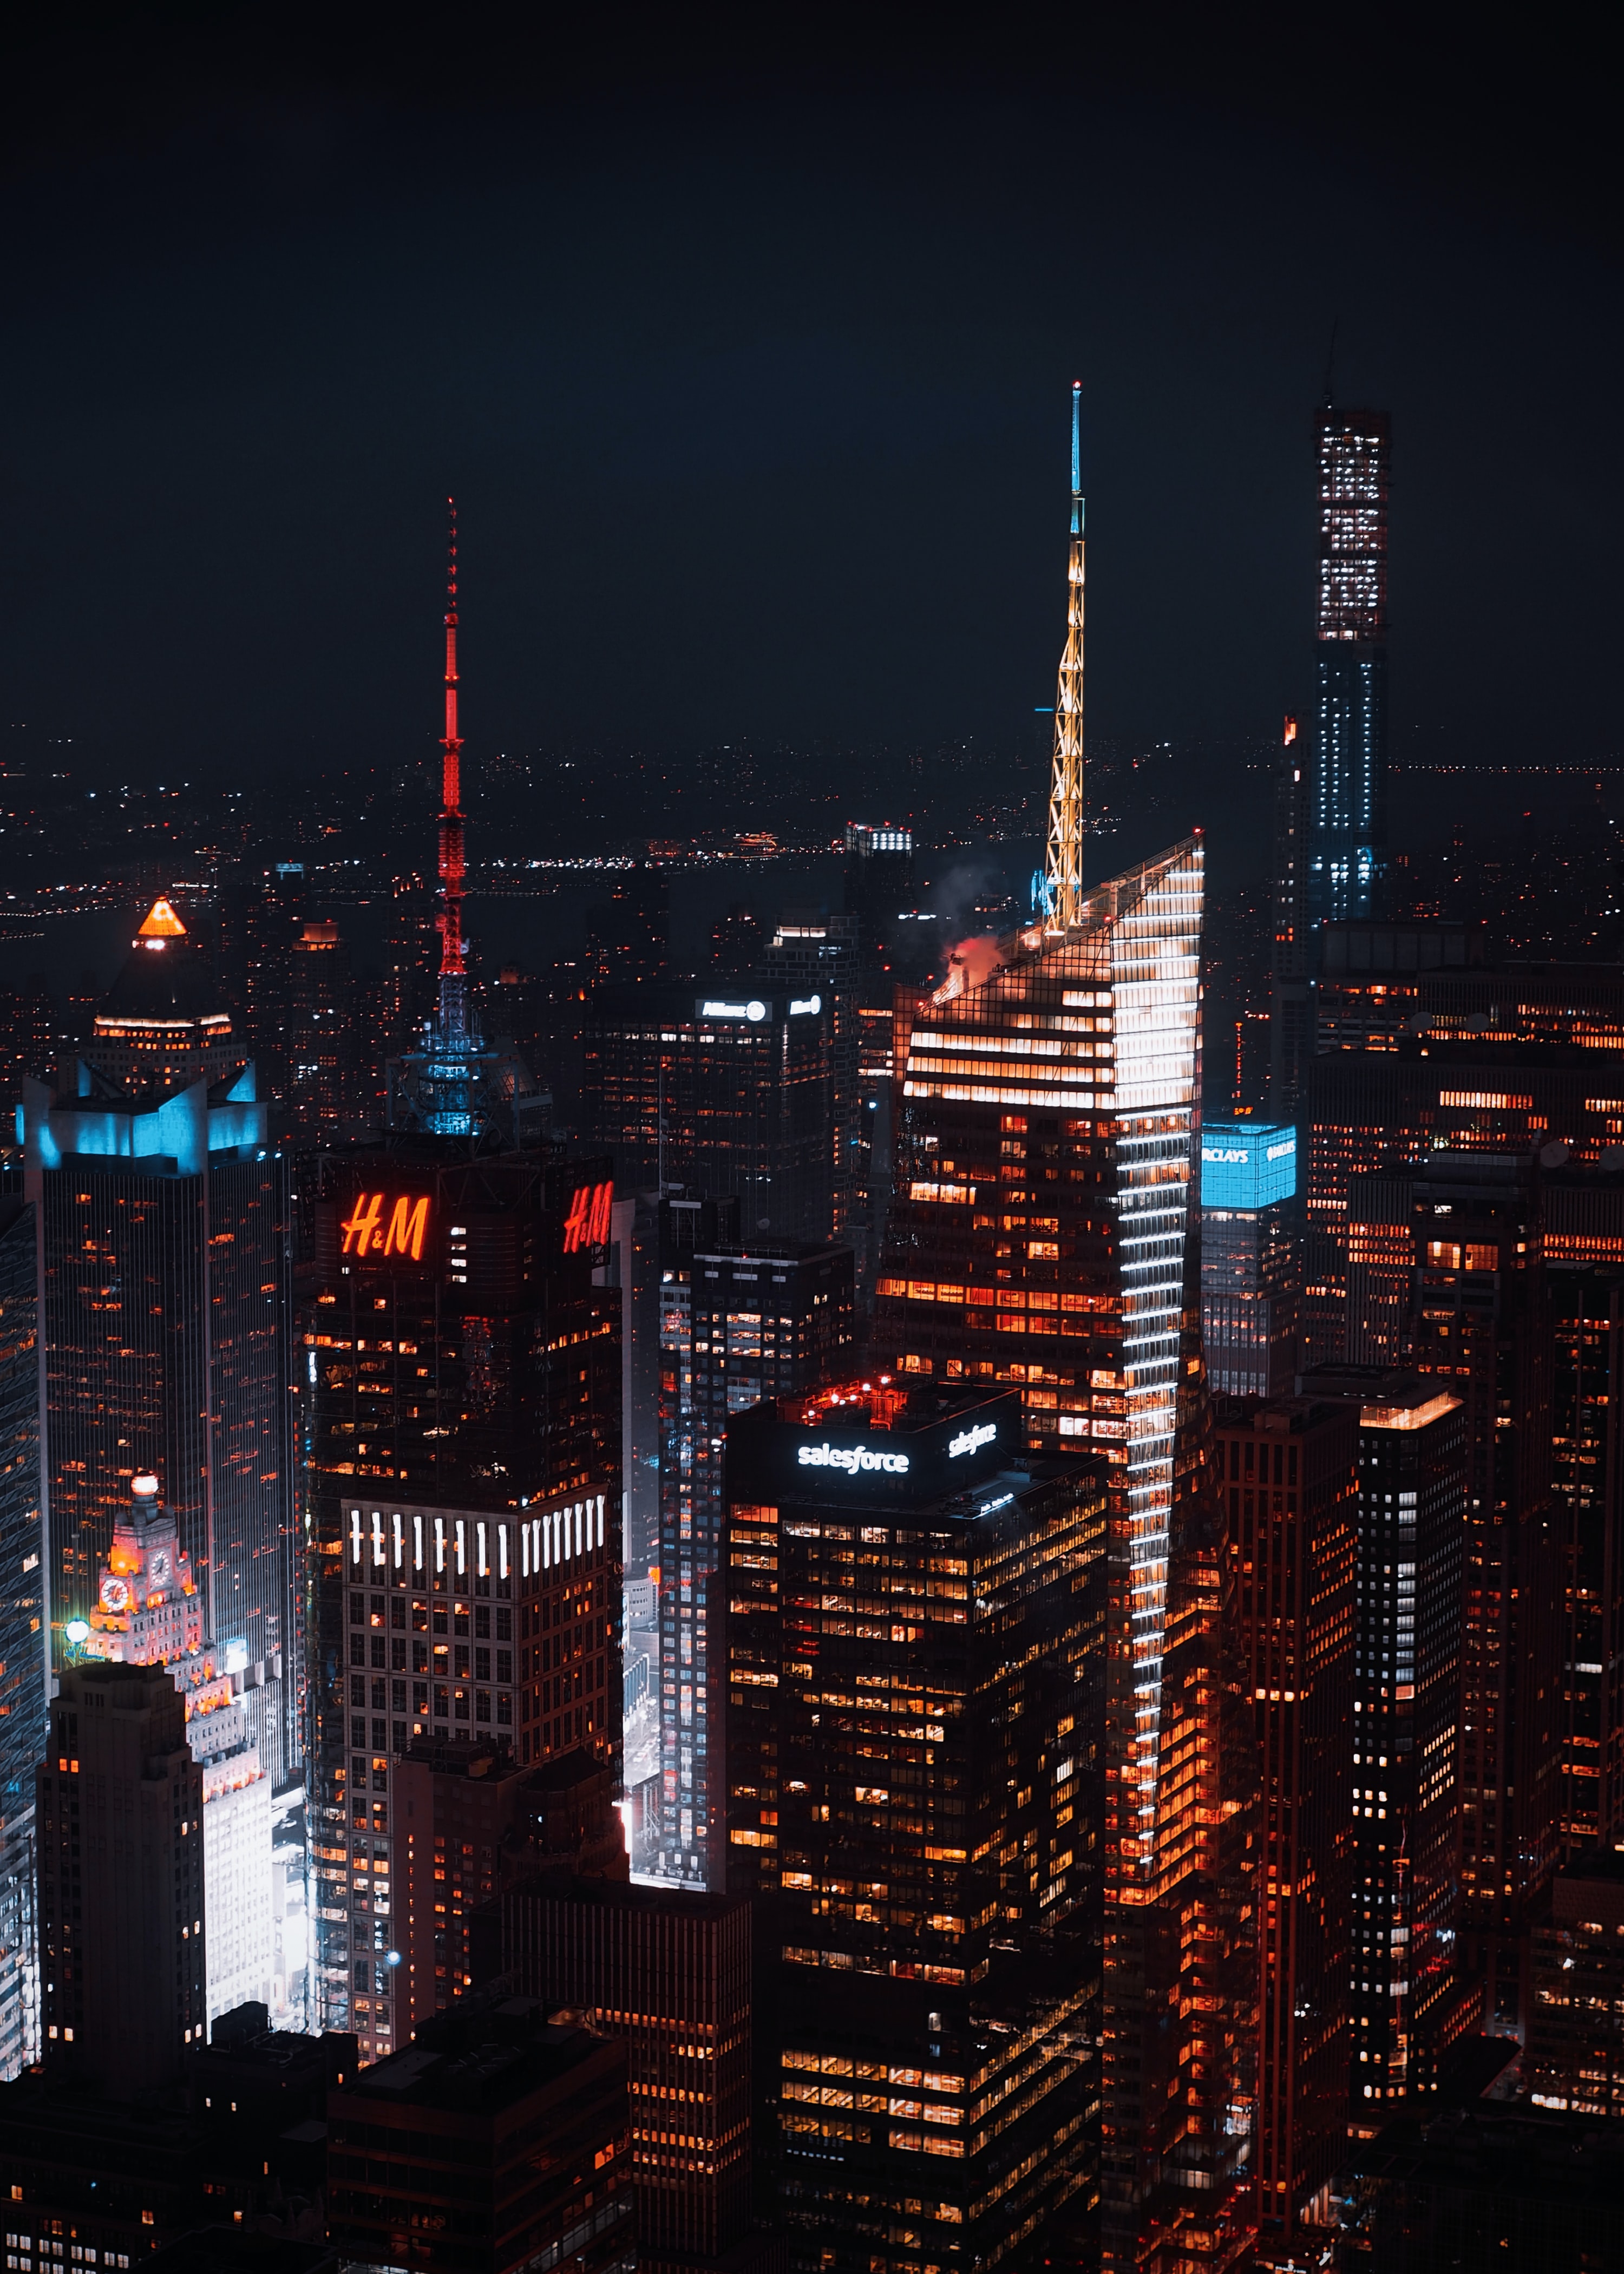 architecture, cities, night, city, building, view from above, skyscrapers